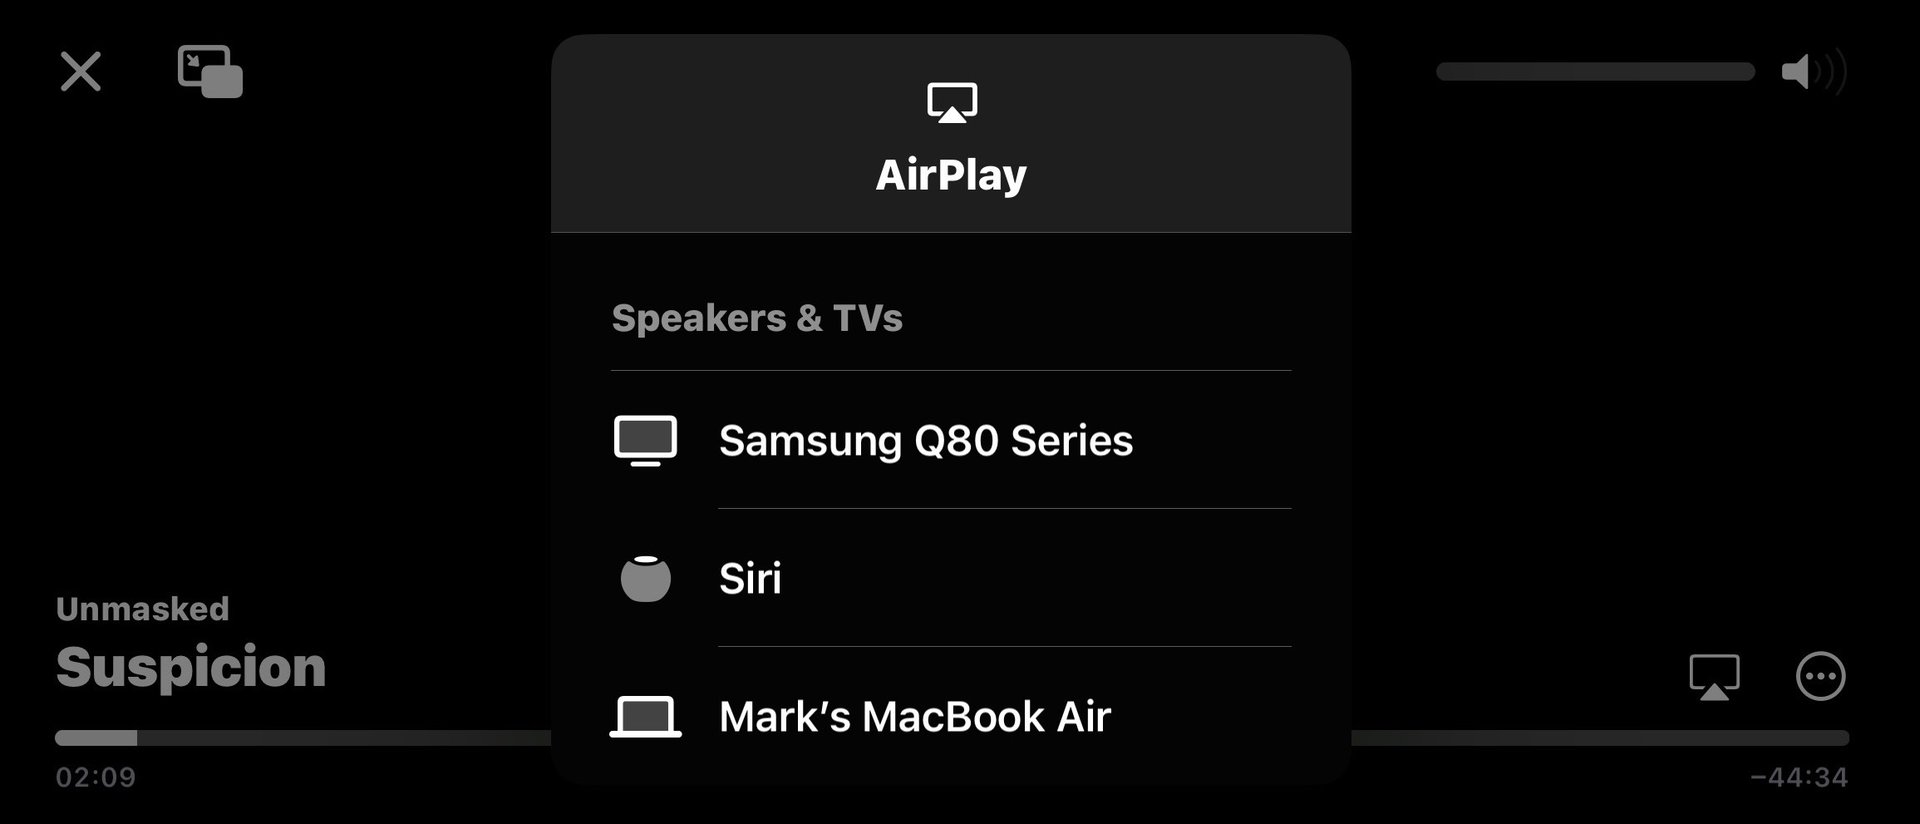 airplay devices list iphone apple TV